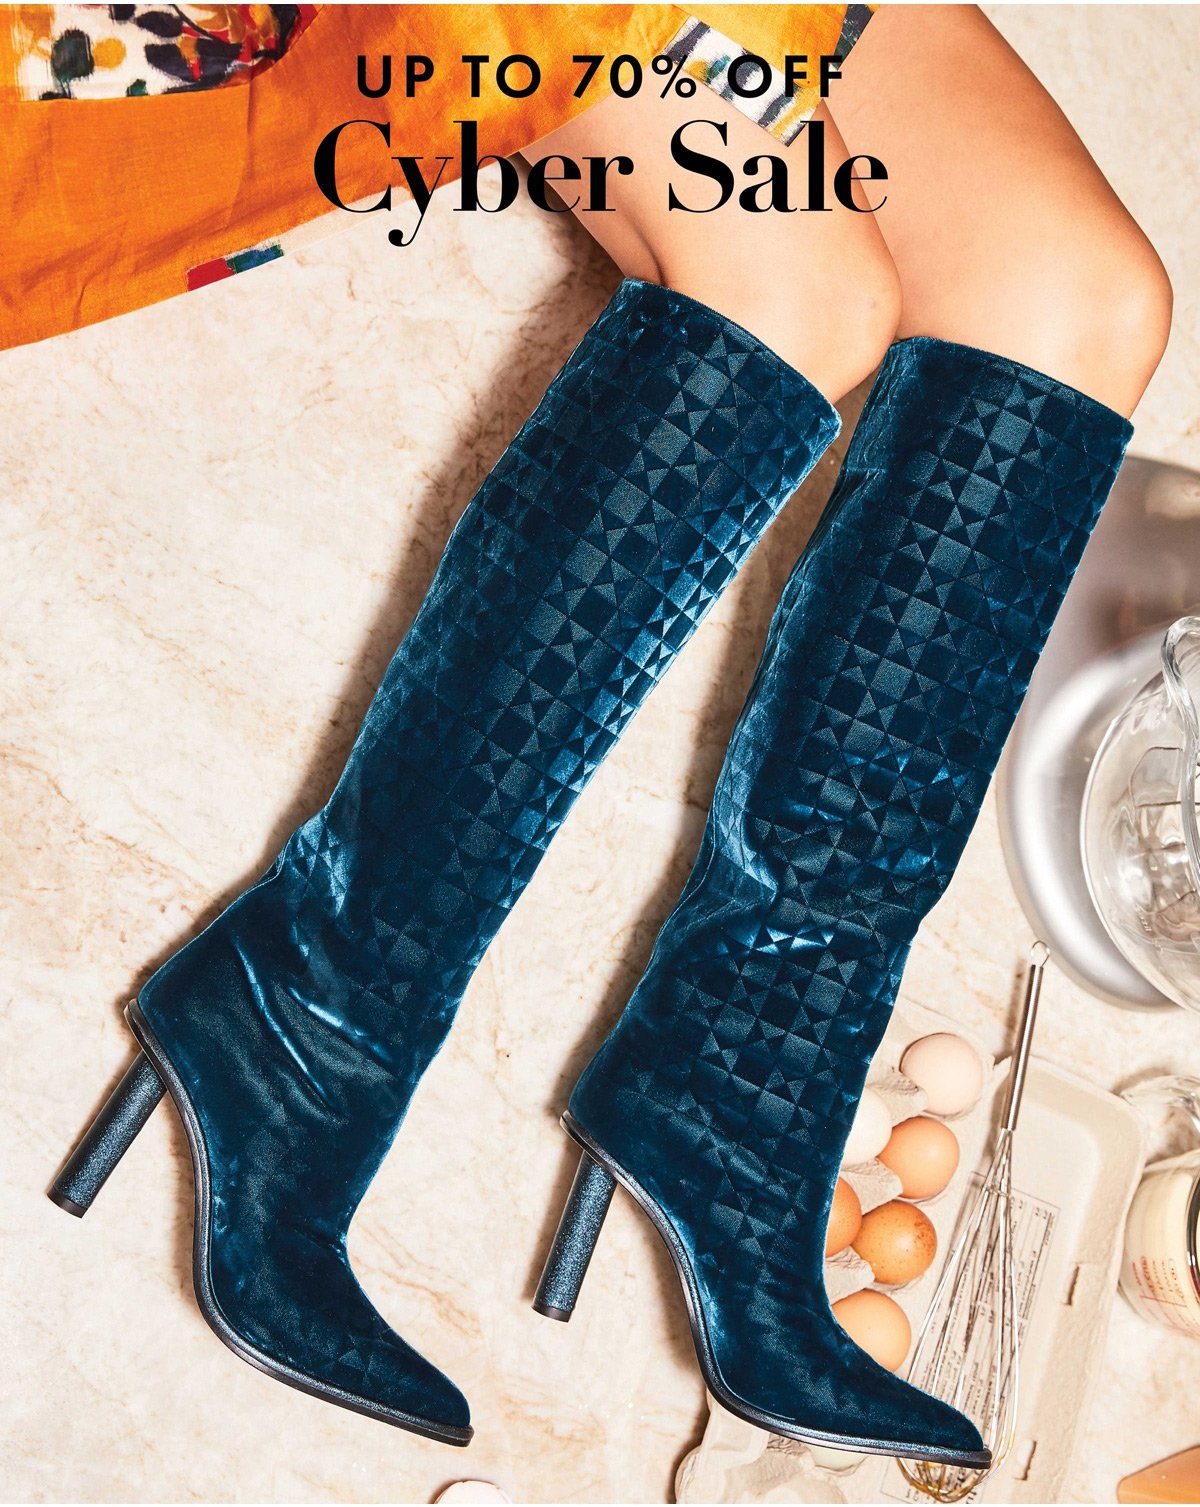 Cyber Sale - Up to 70% Off